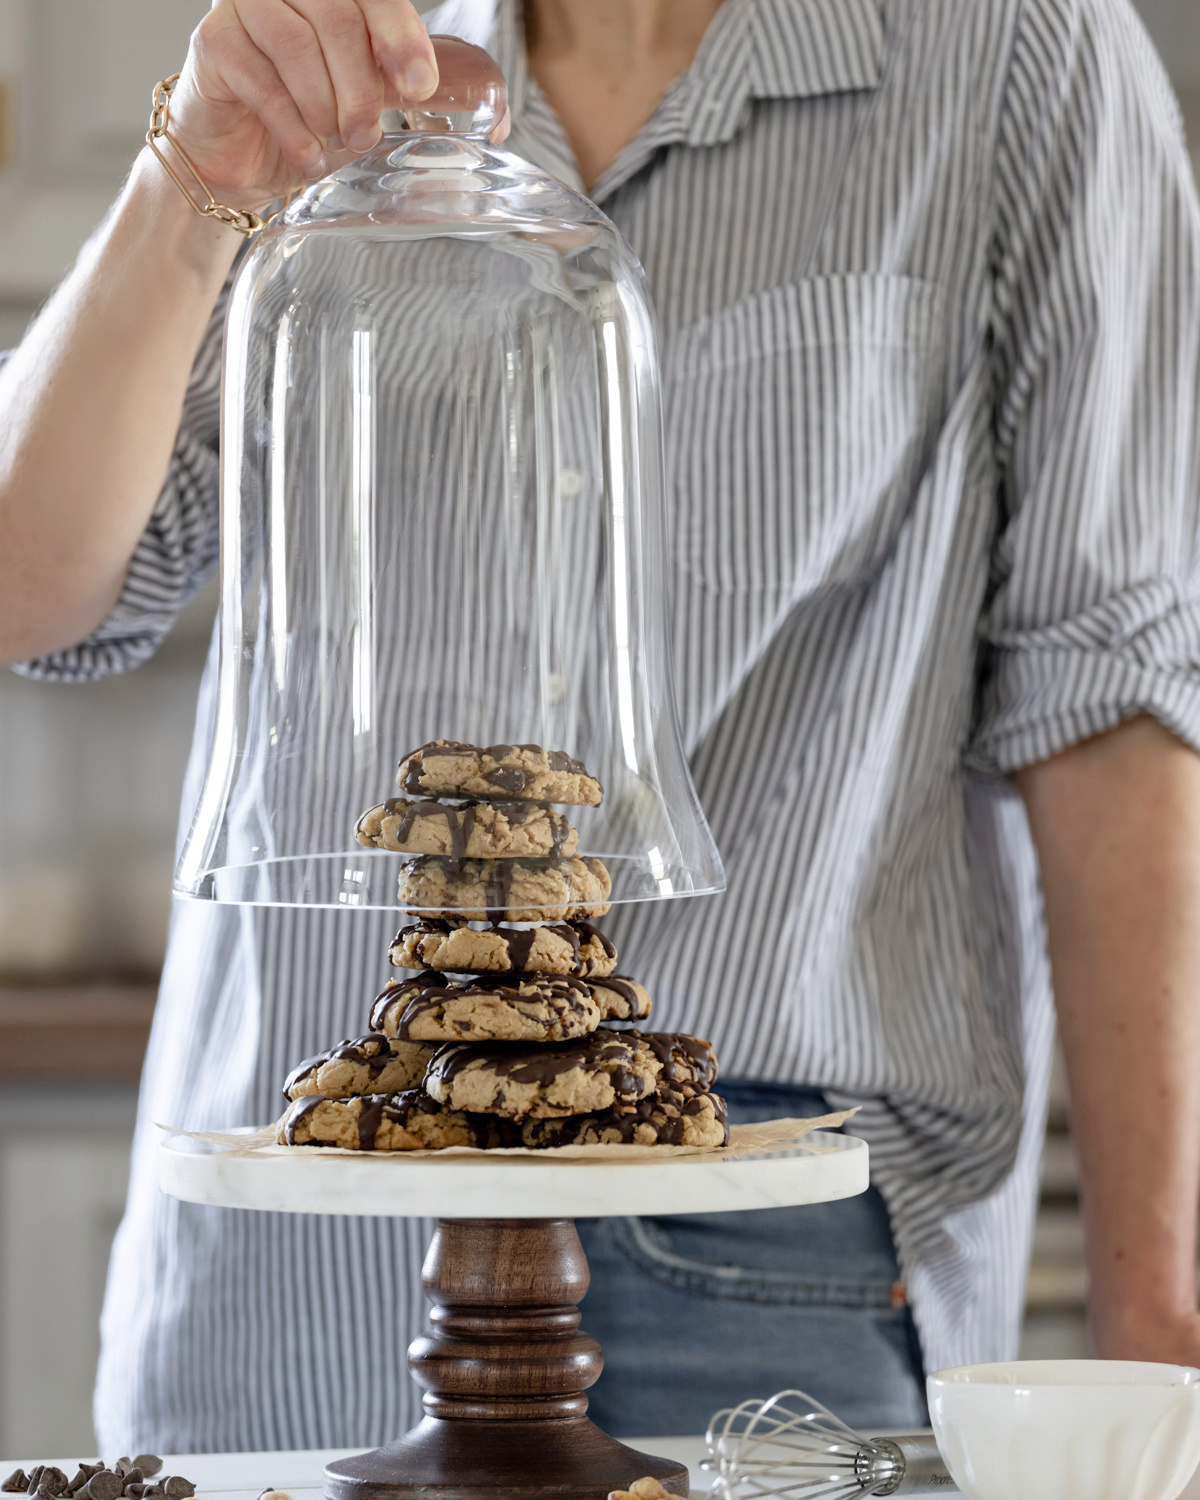 Stacked cookies on a riser.